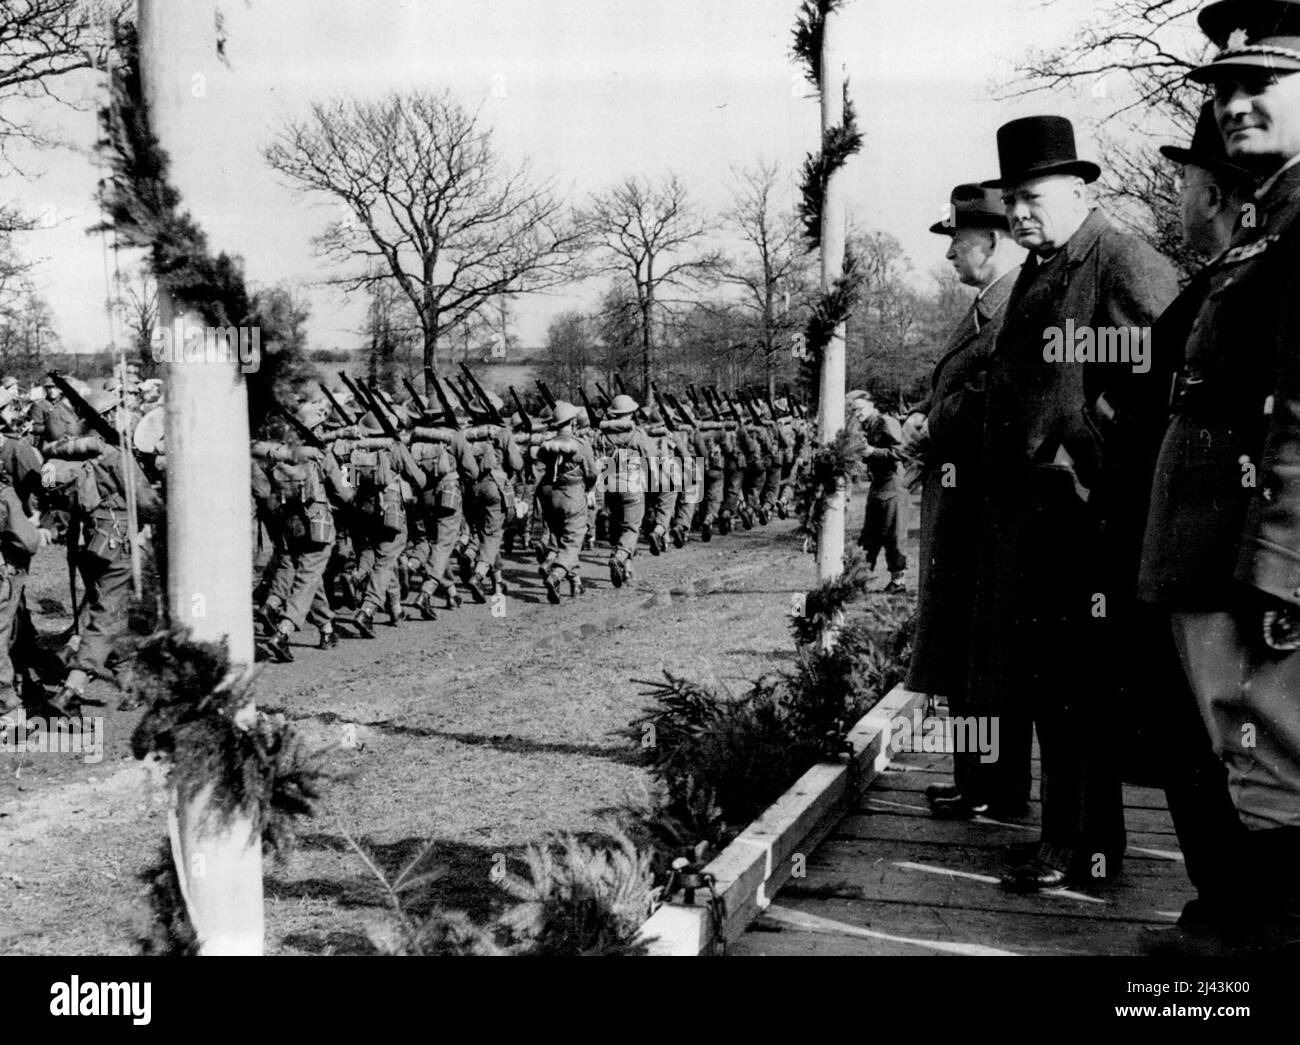 Prime Minister Visits Czech Troops -- The Prime Minister and Dr. Benes at the saluting base during the March past. The Prime Minister paid a visit to Czechoslovak troops in this country. He was accompanied by Mrs. Churchill, Dr. Benes (Czech President), Mgr. Sramer (Prime Minister of Czechoslovakia), Mr. Averell Harriman, President Roosevelt's personal representative, and Major General K. H. Arnold, Chief of the U.S. Army Air Corps. July 07, 1941. (Photo by British Official Photograph). Stock Photo